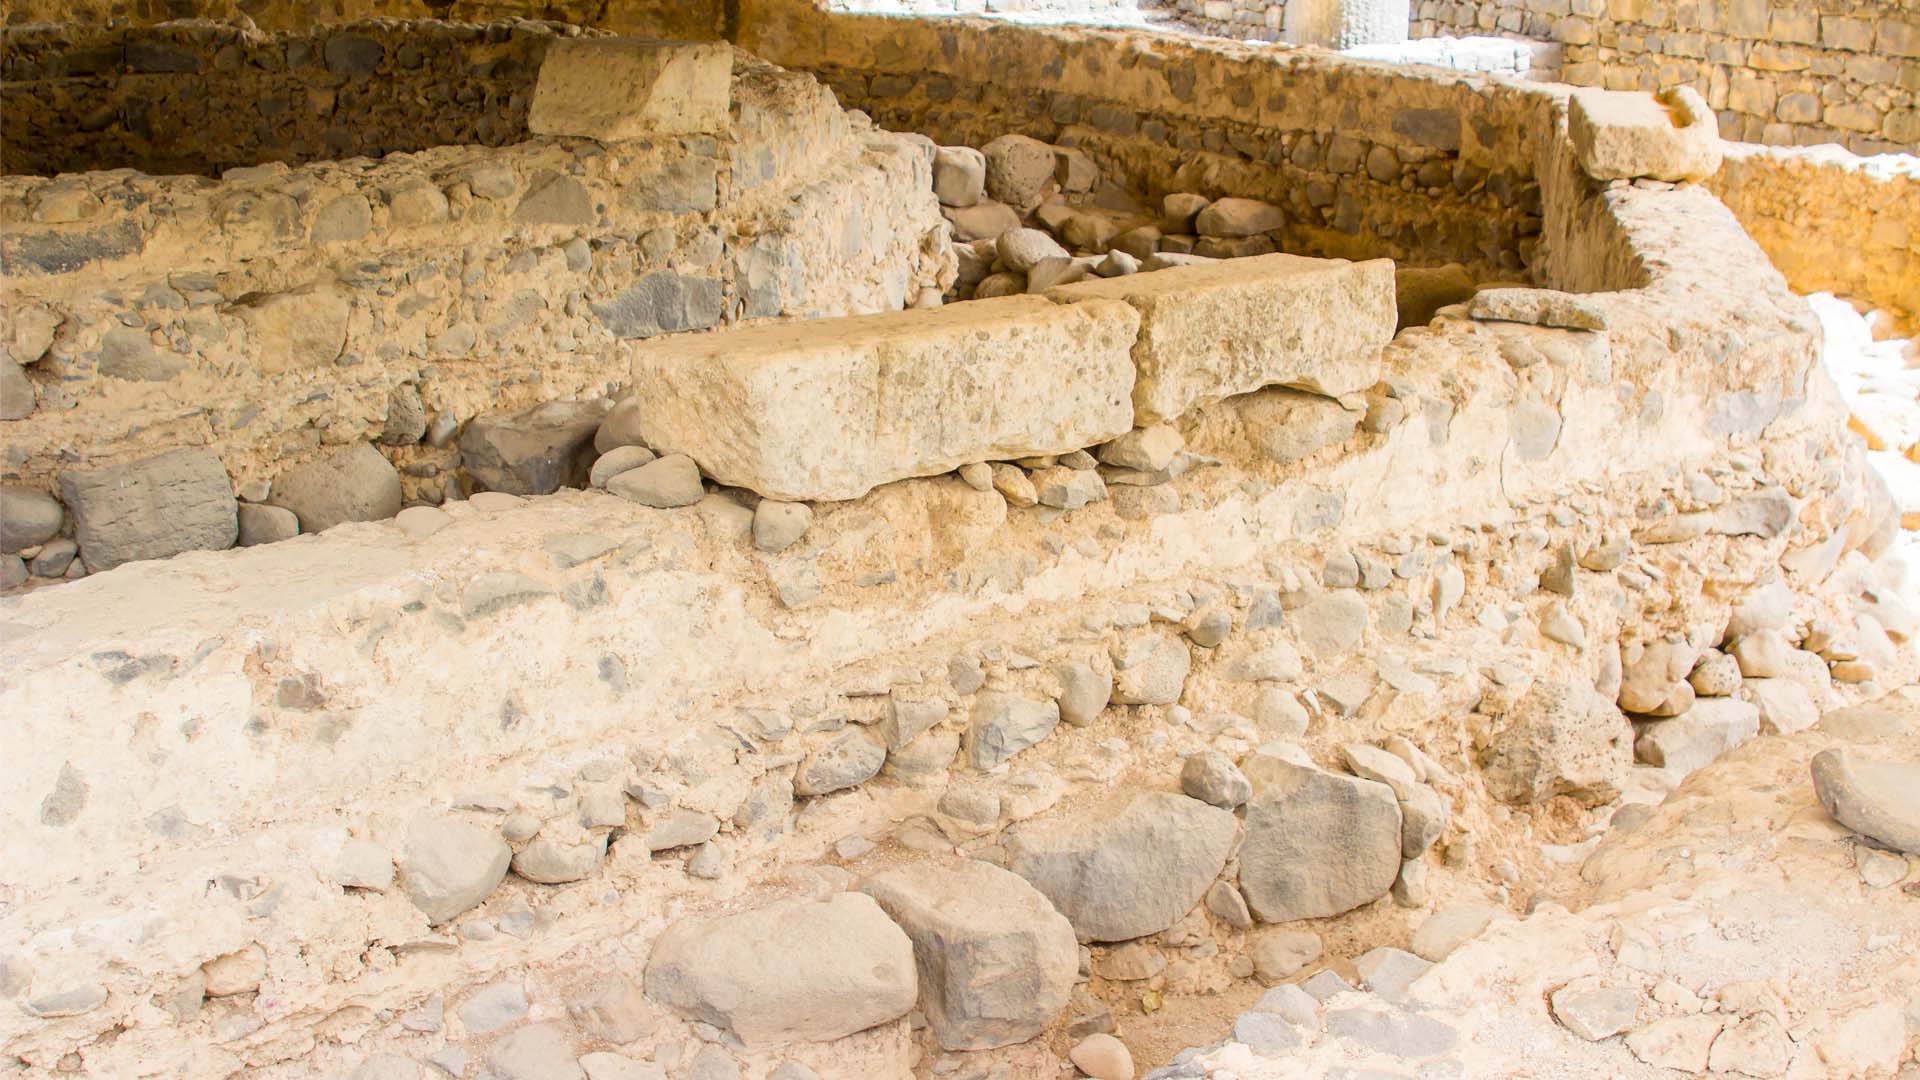 The walls and foundation of the Apostle Peter's house - the rock on which the church was built.